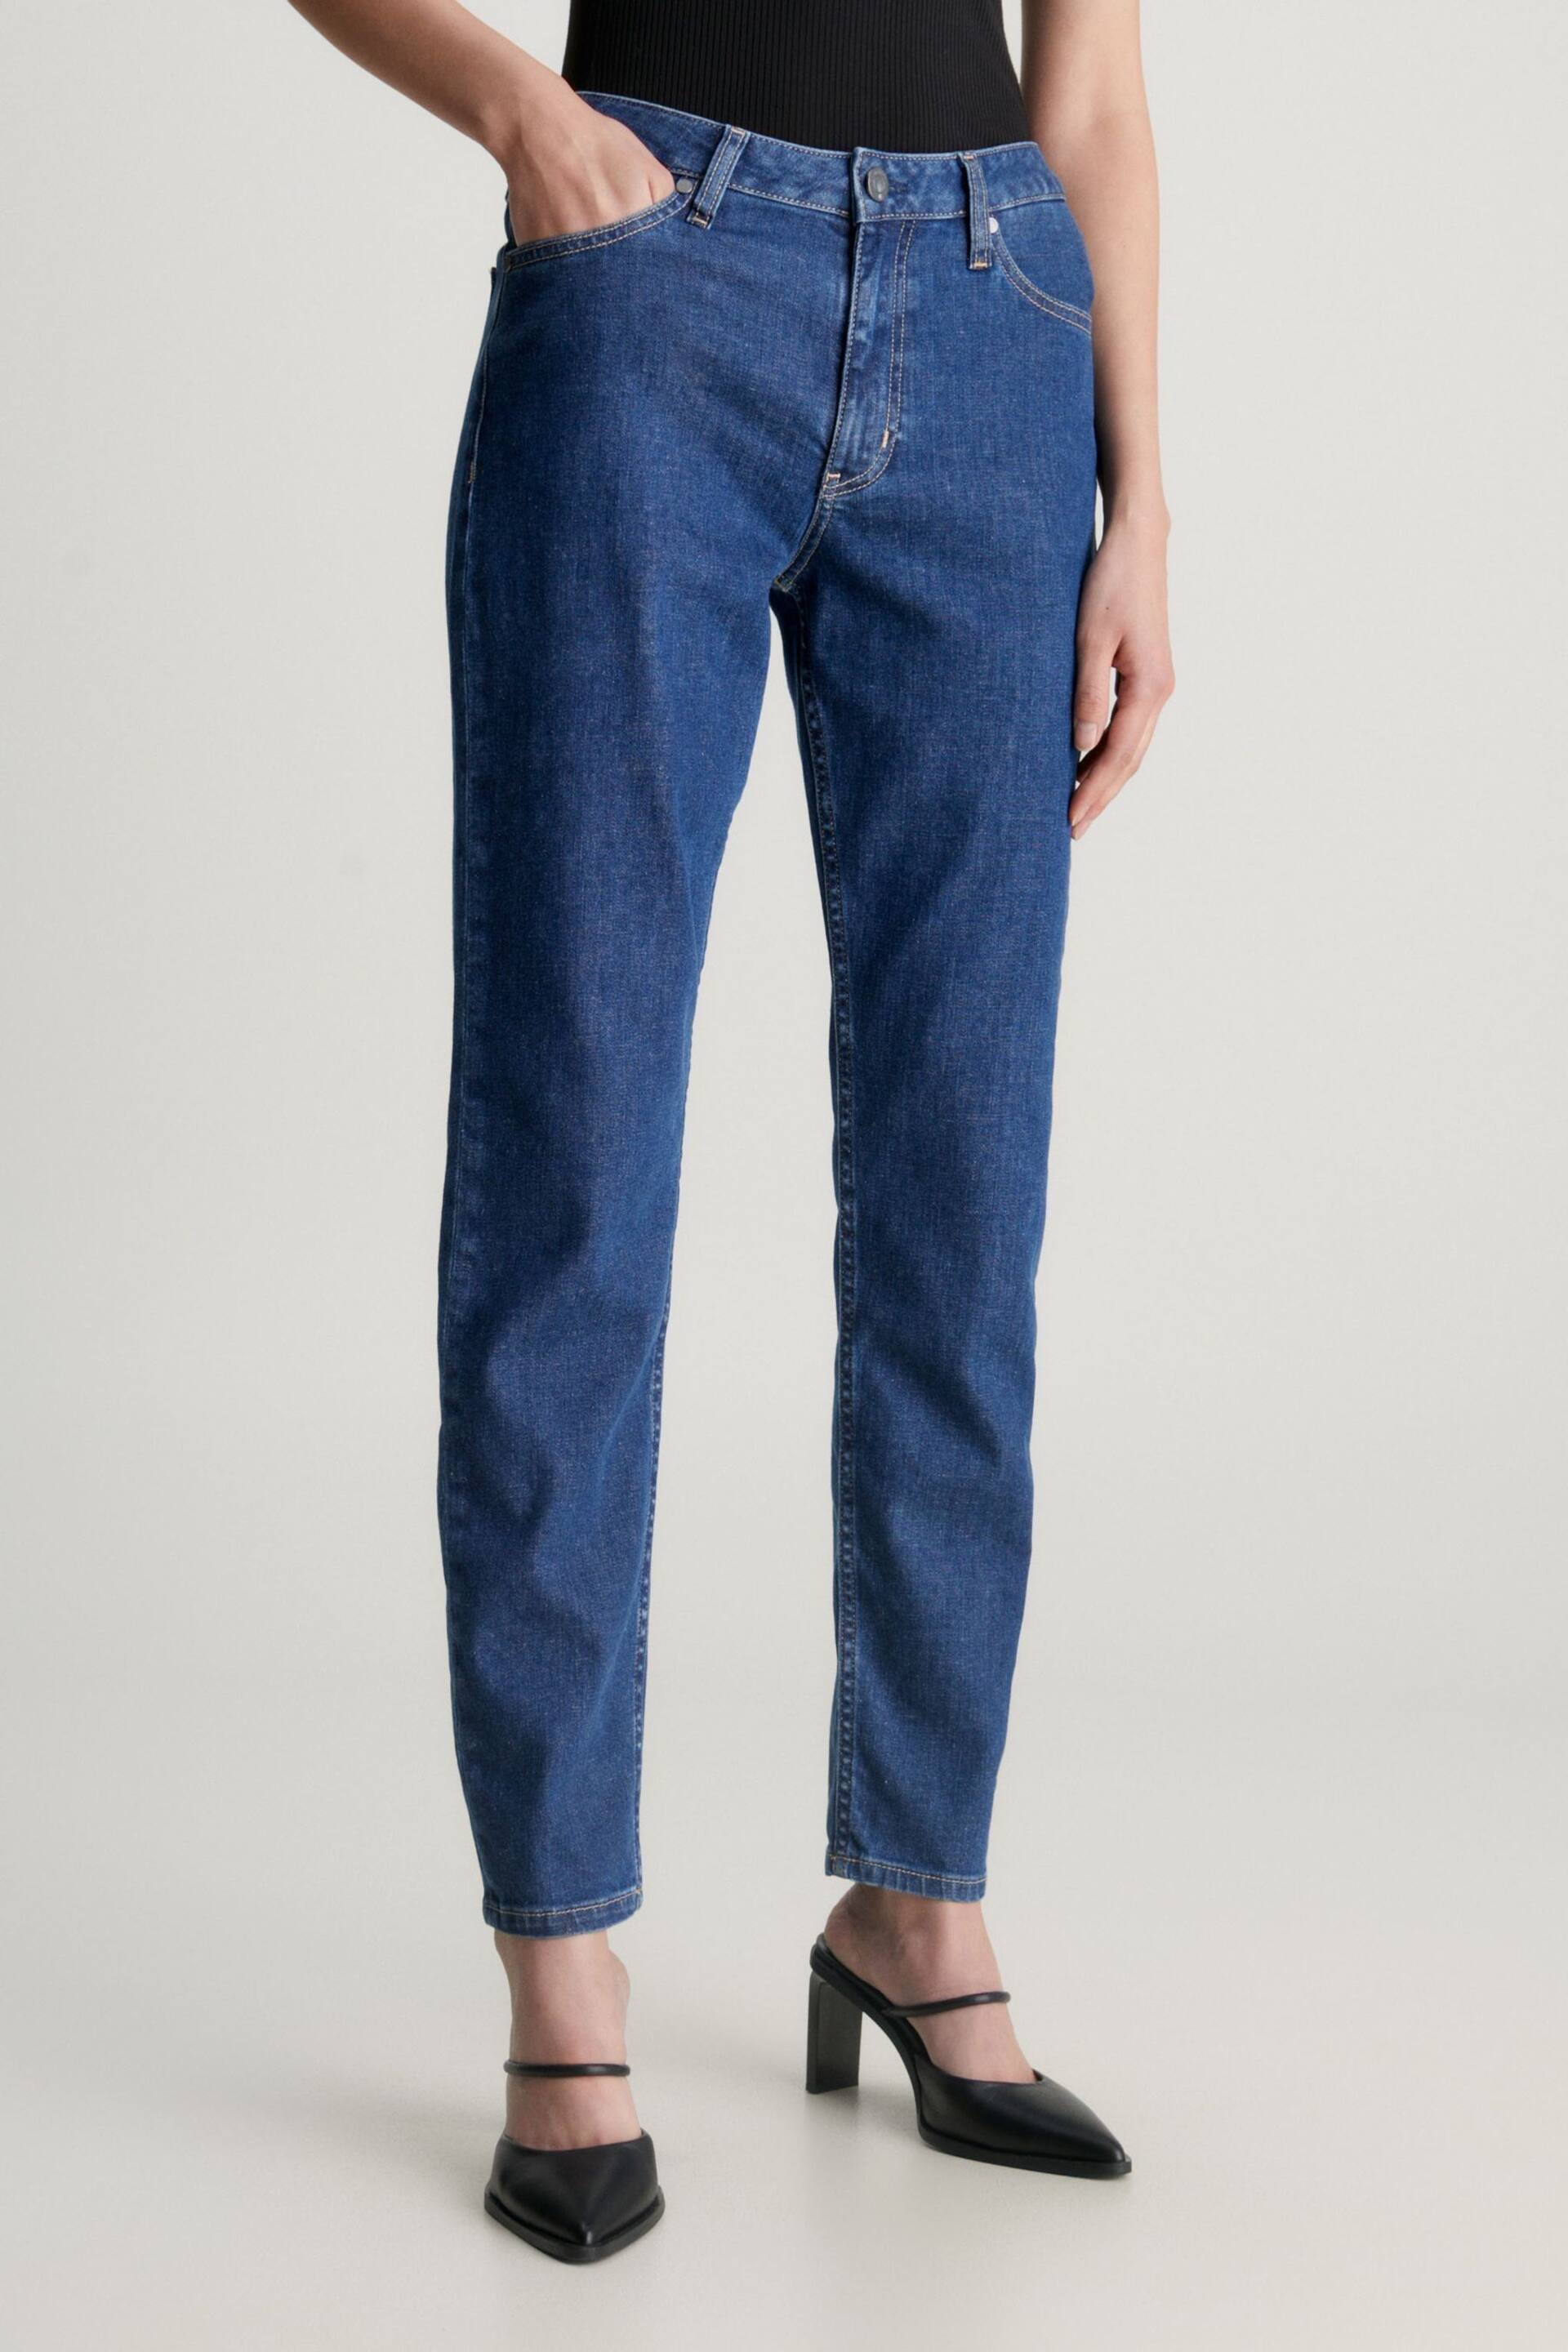 Calvin Klein Blue Slim Mid Rise Jeans - Image 1 of 5